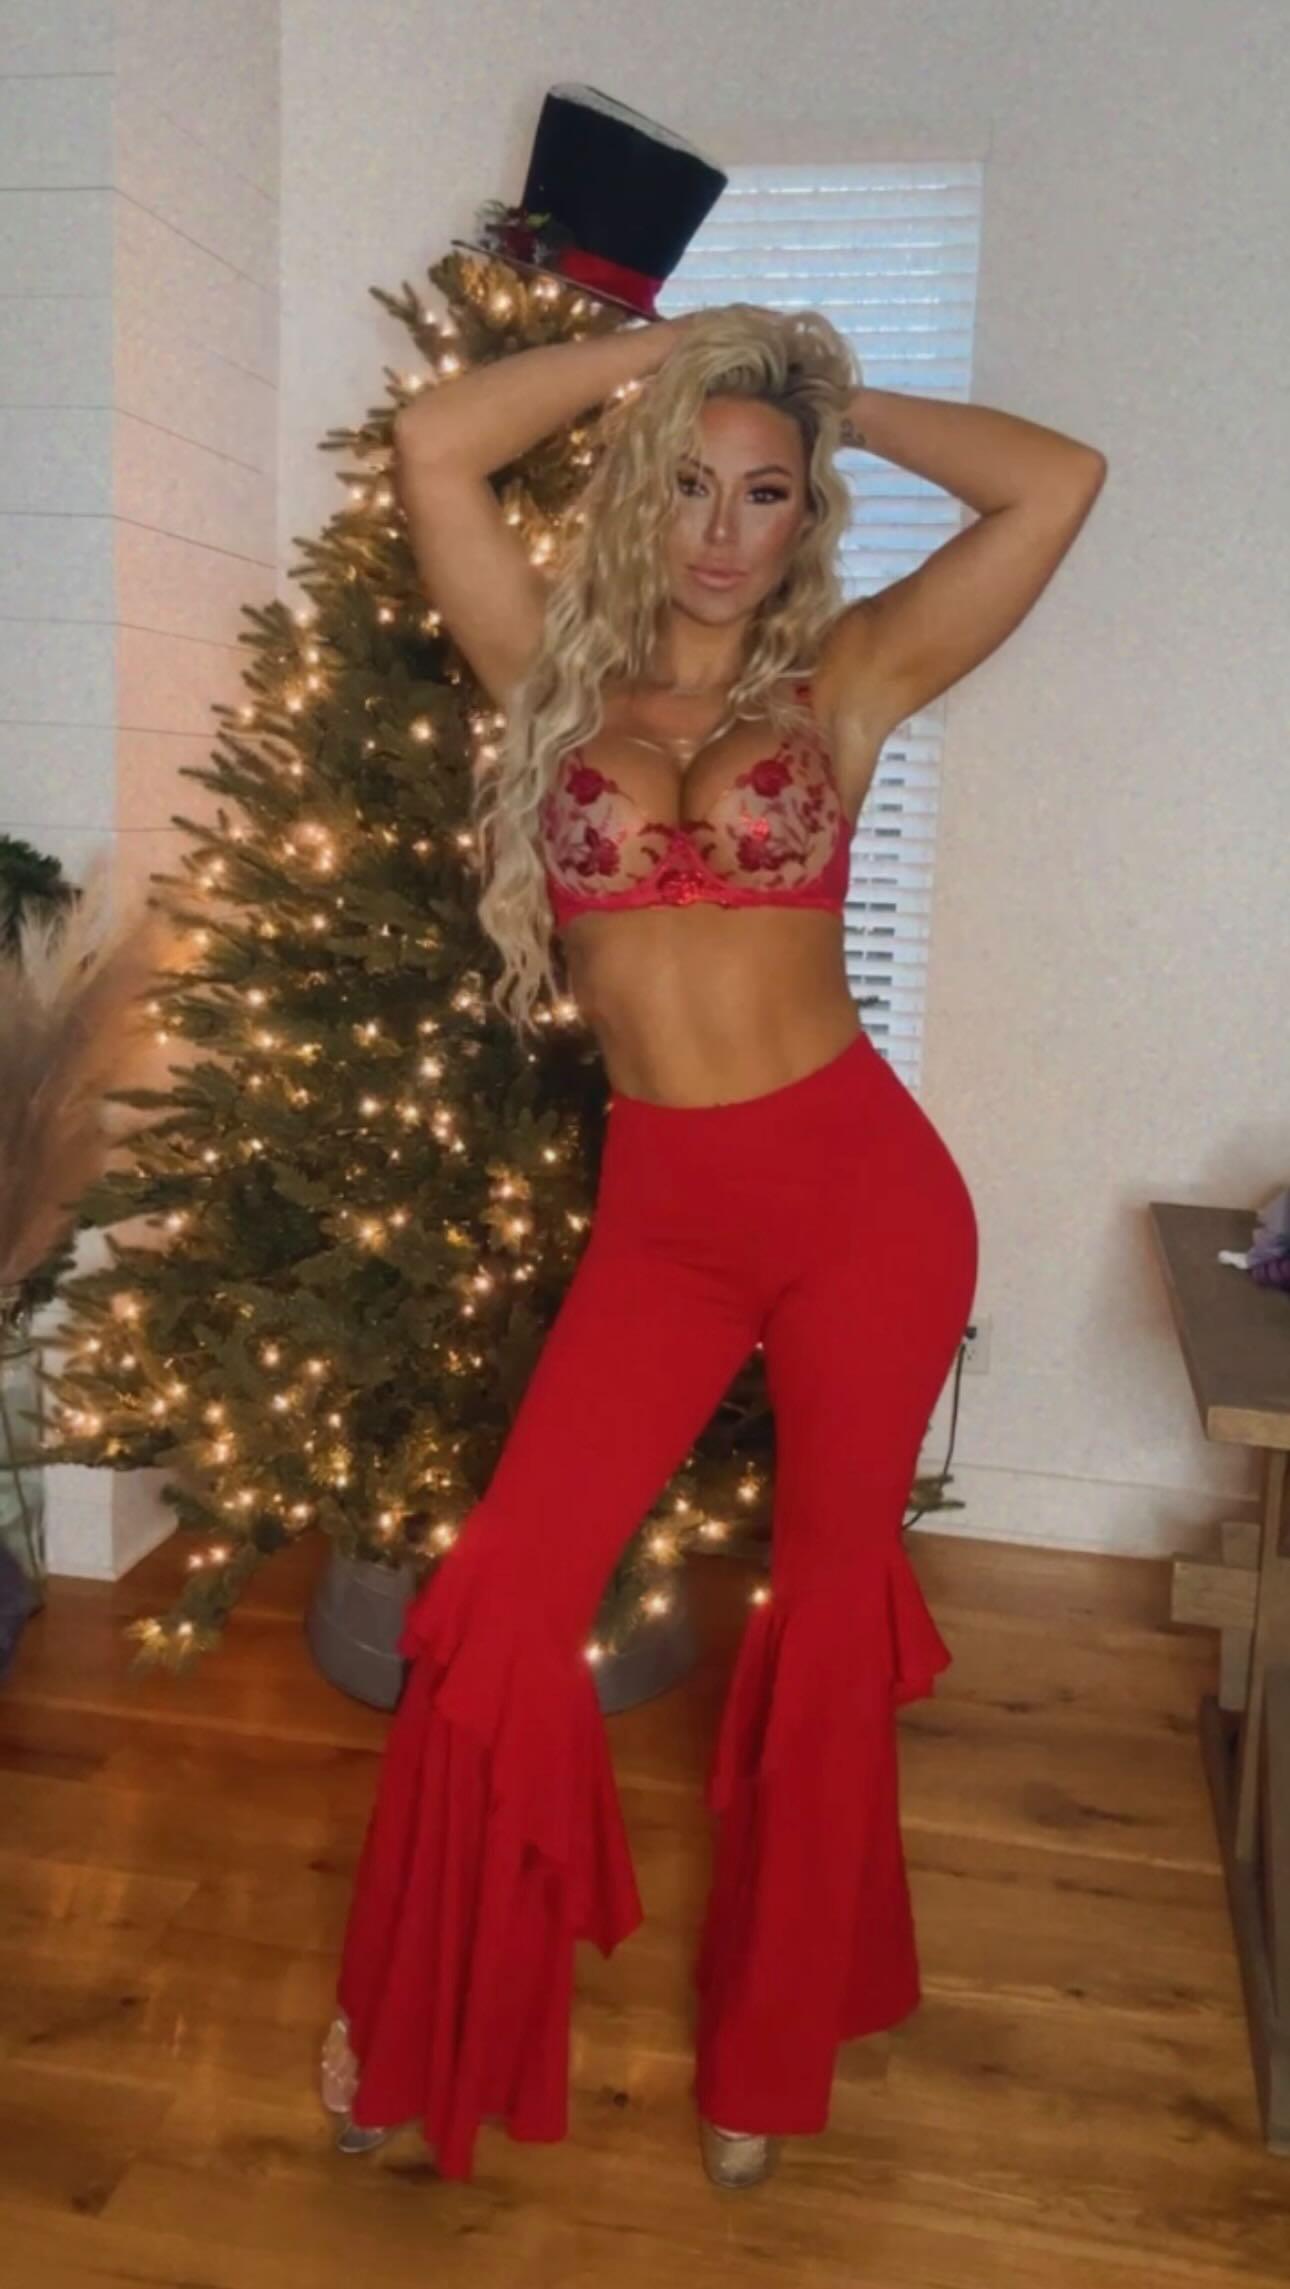 Kindly Myers dances in front of the Christmas tree in red pants and lingerie